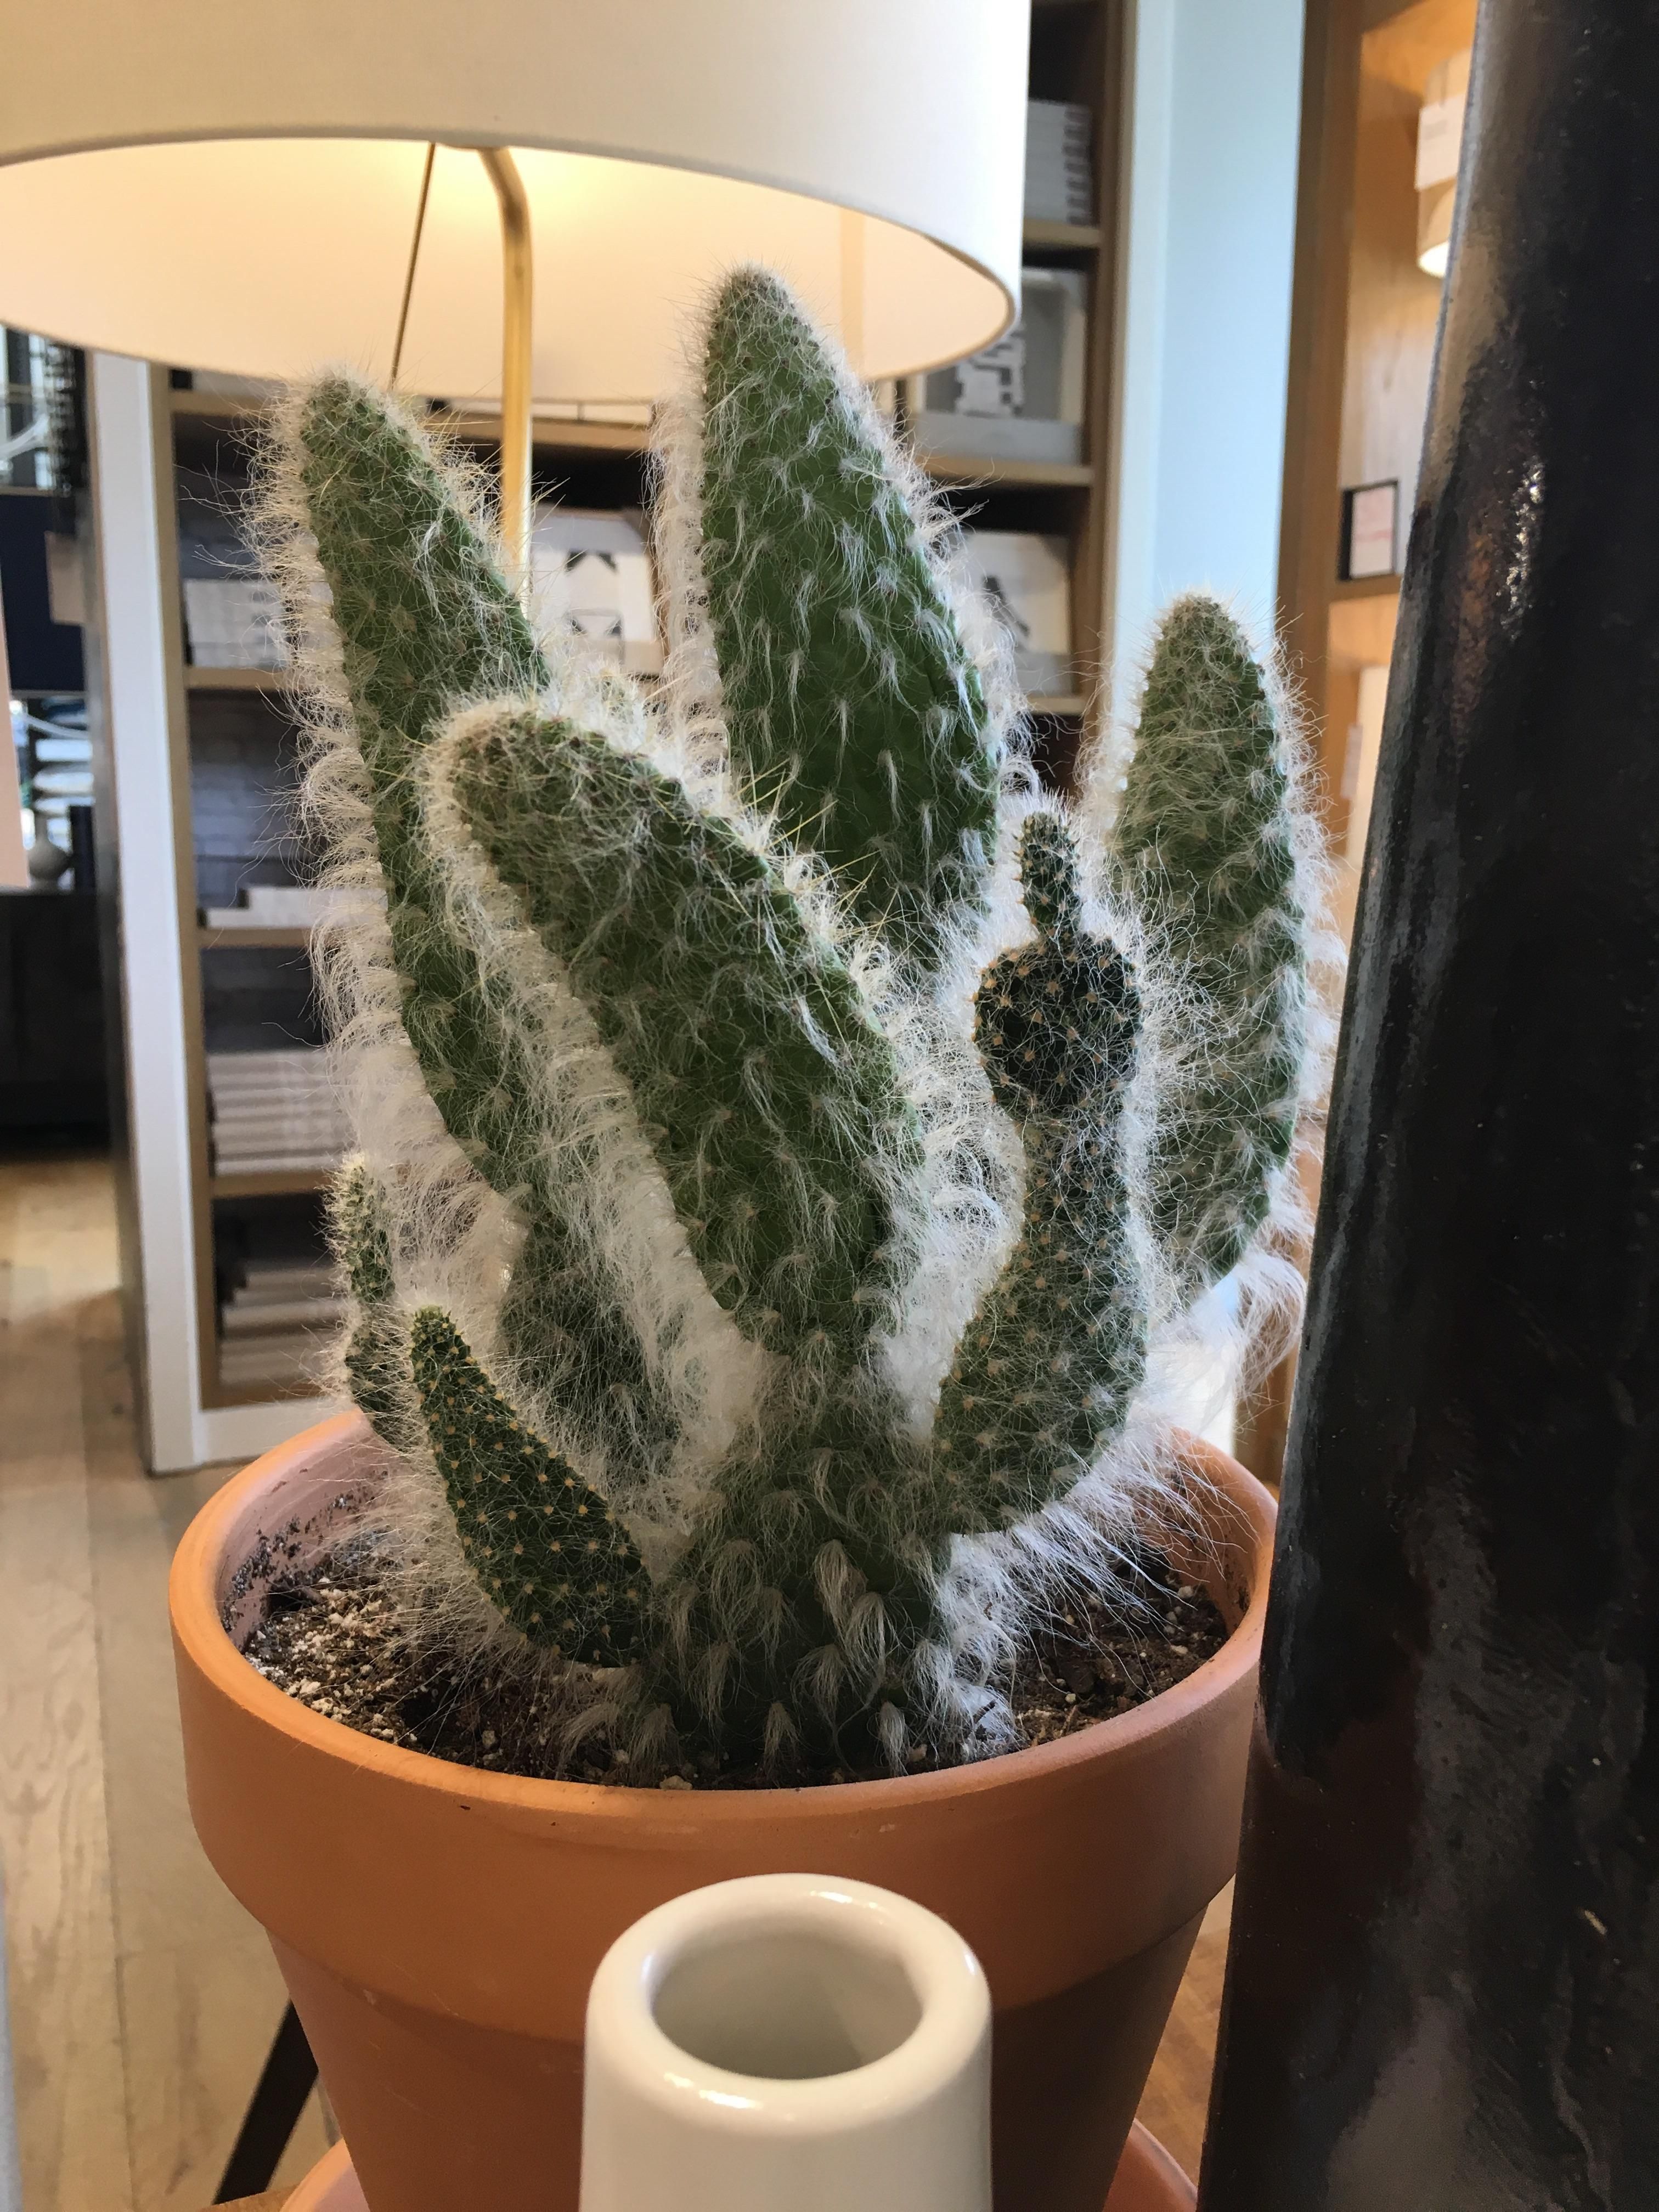 This cactus looks like it's giving the middle finger.